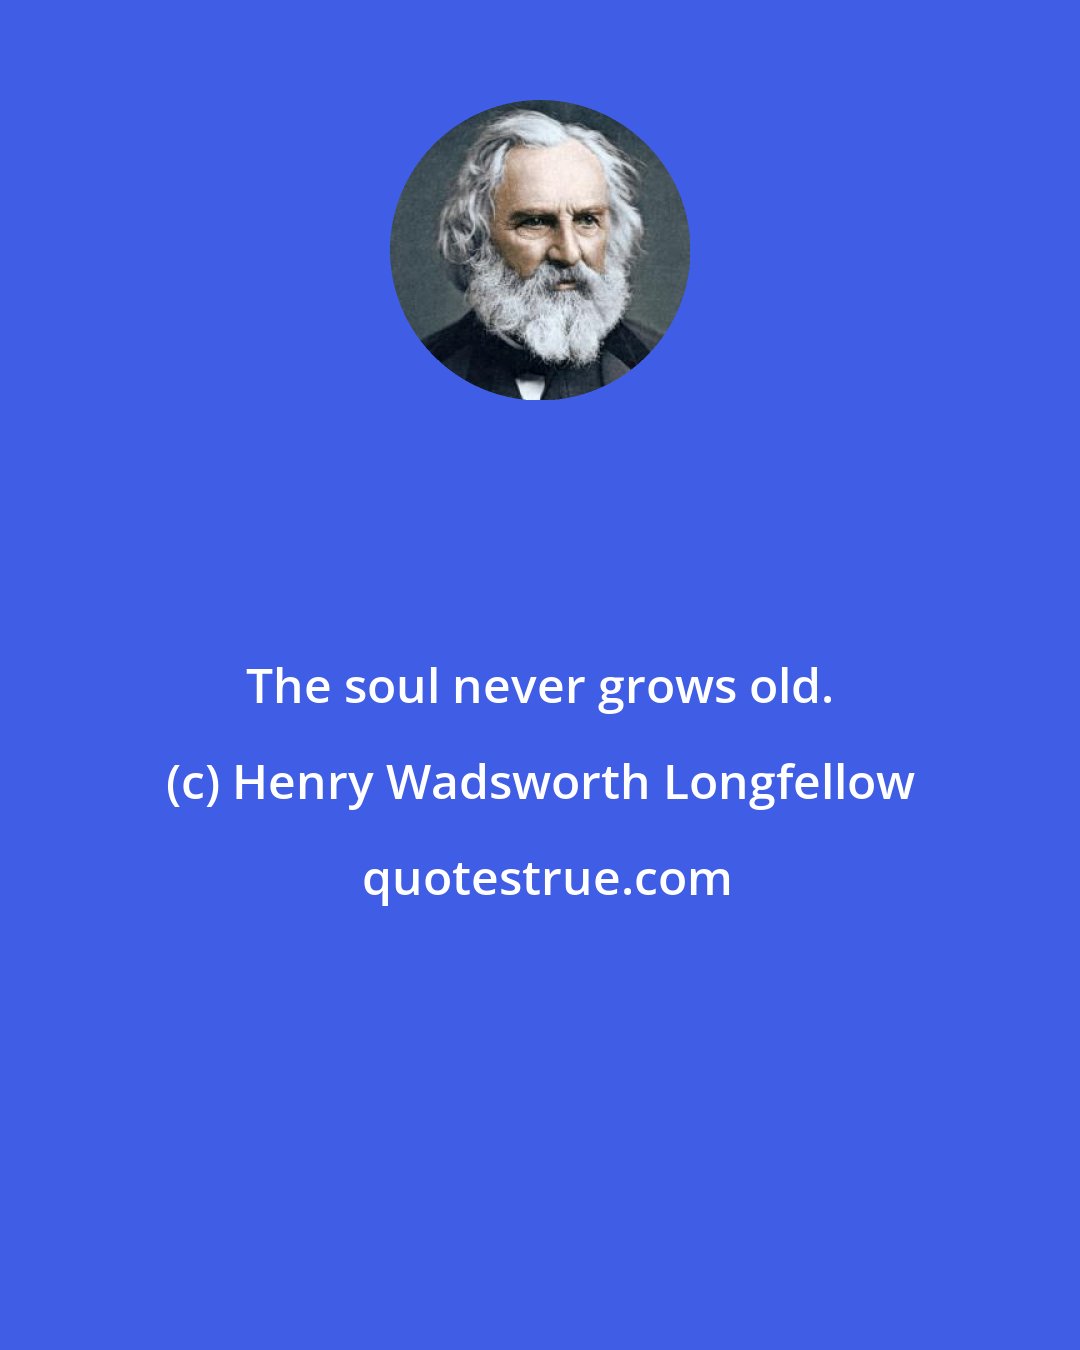 Henry Wadsworth Longfellow: The soul never grows old.